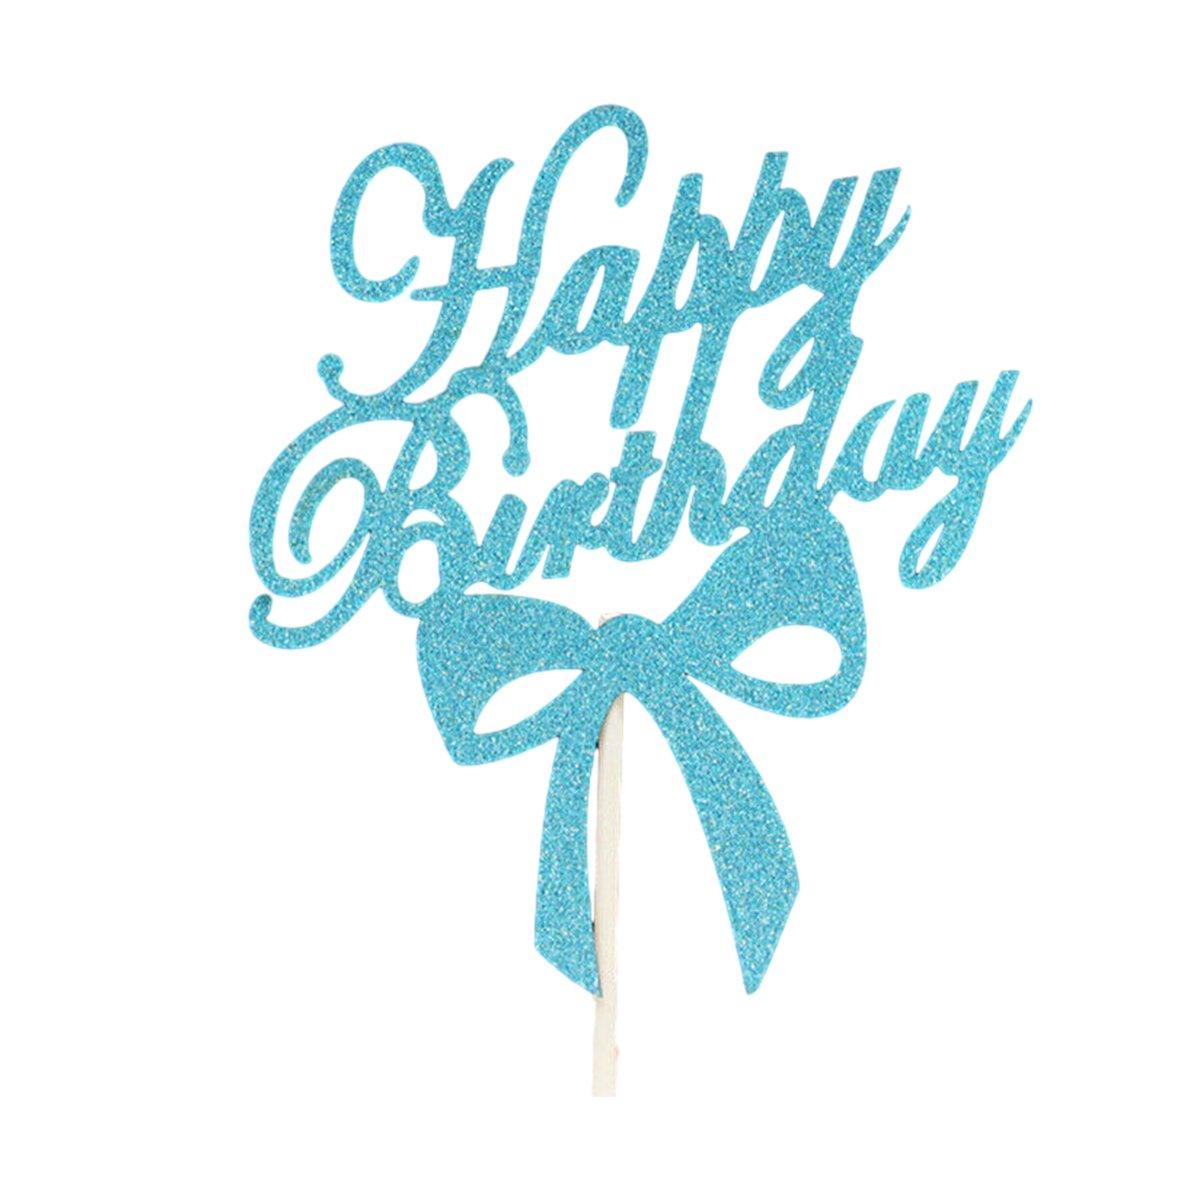 Happy Birthday Cake Topper 1PC 5Colours 6Styles Acrylic - Discount Packaging Warehouse